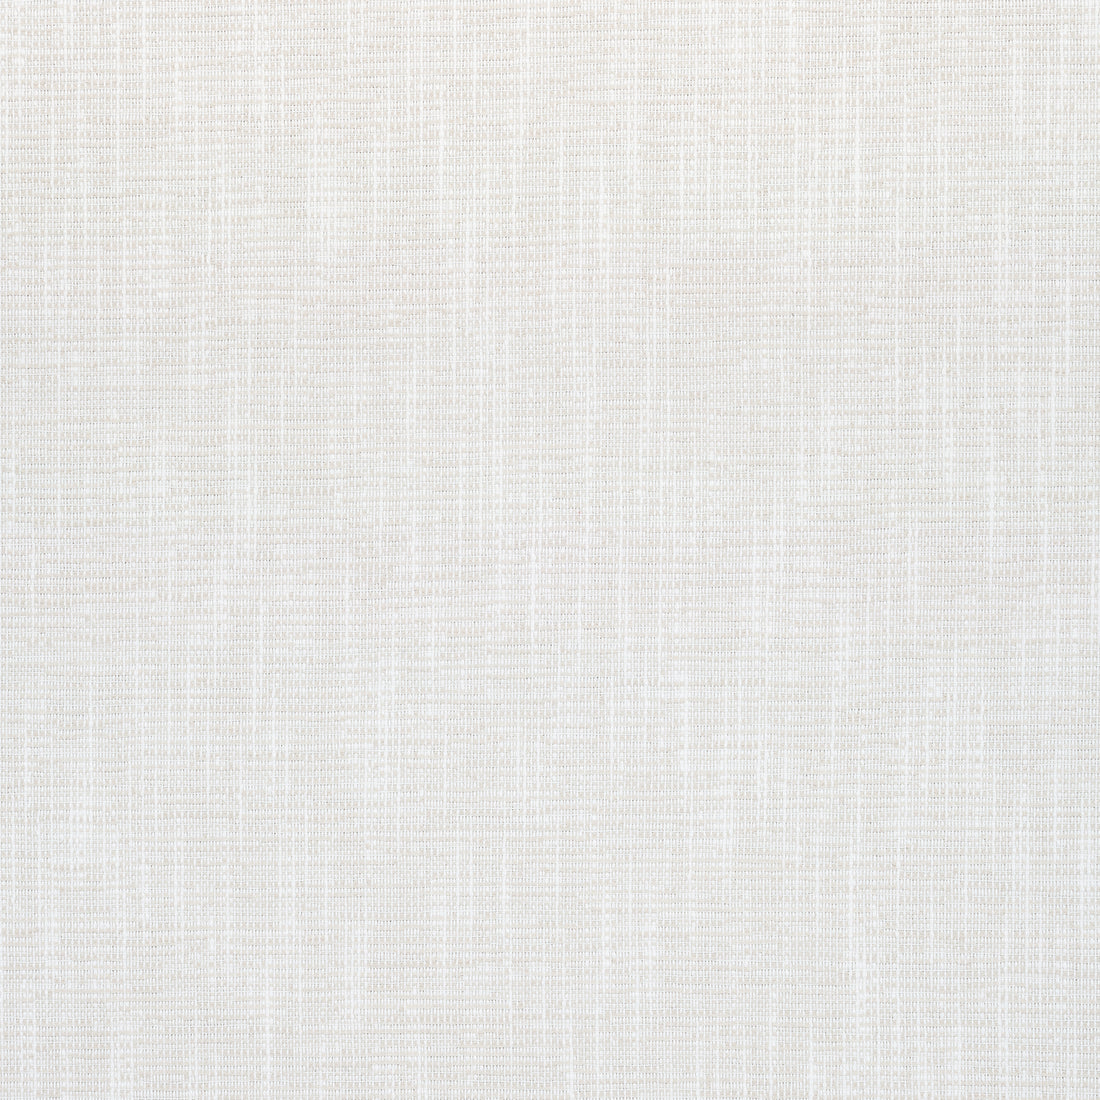 Piper fabric in flax color - pattern number W73440 - by Thibaut in the Landmark Textures collection